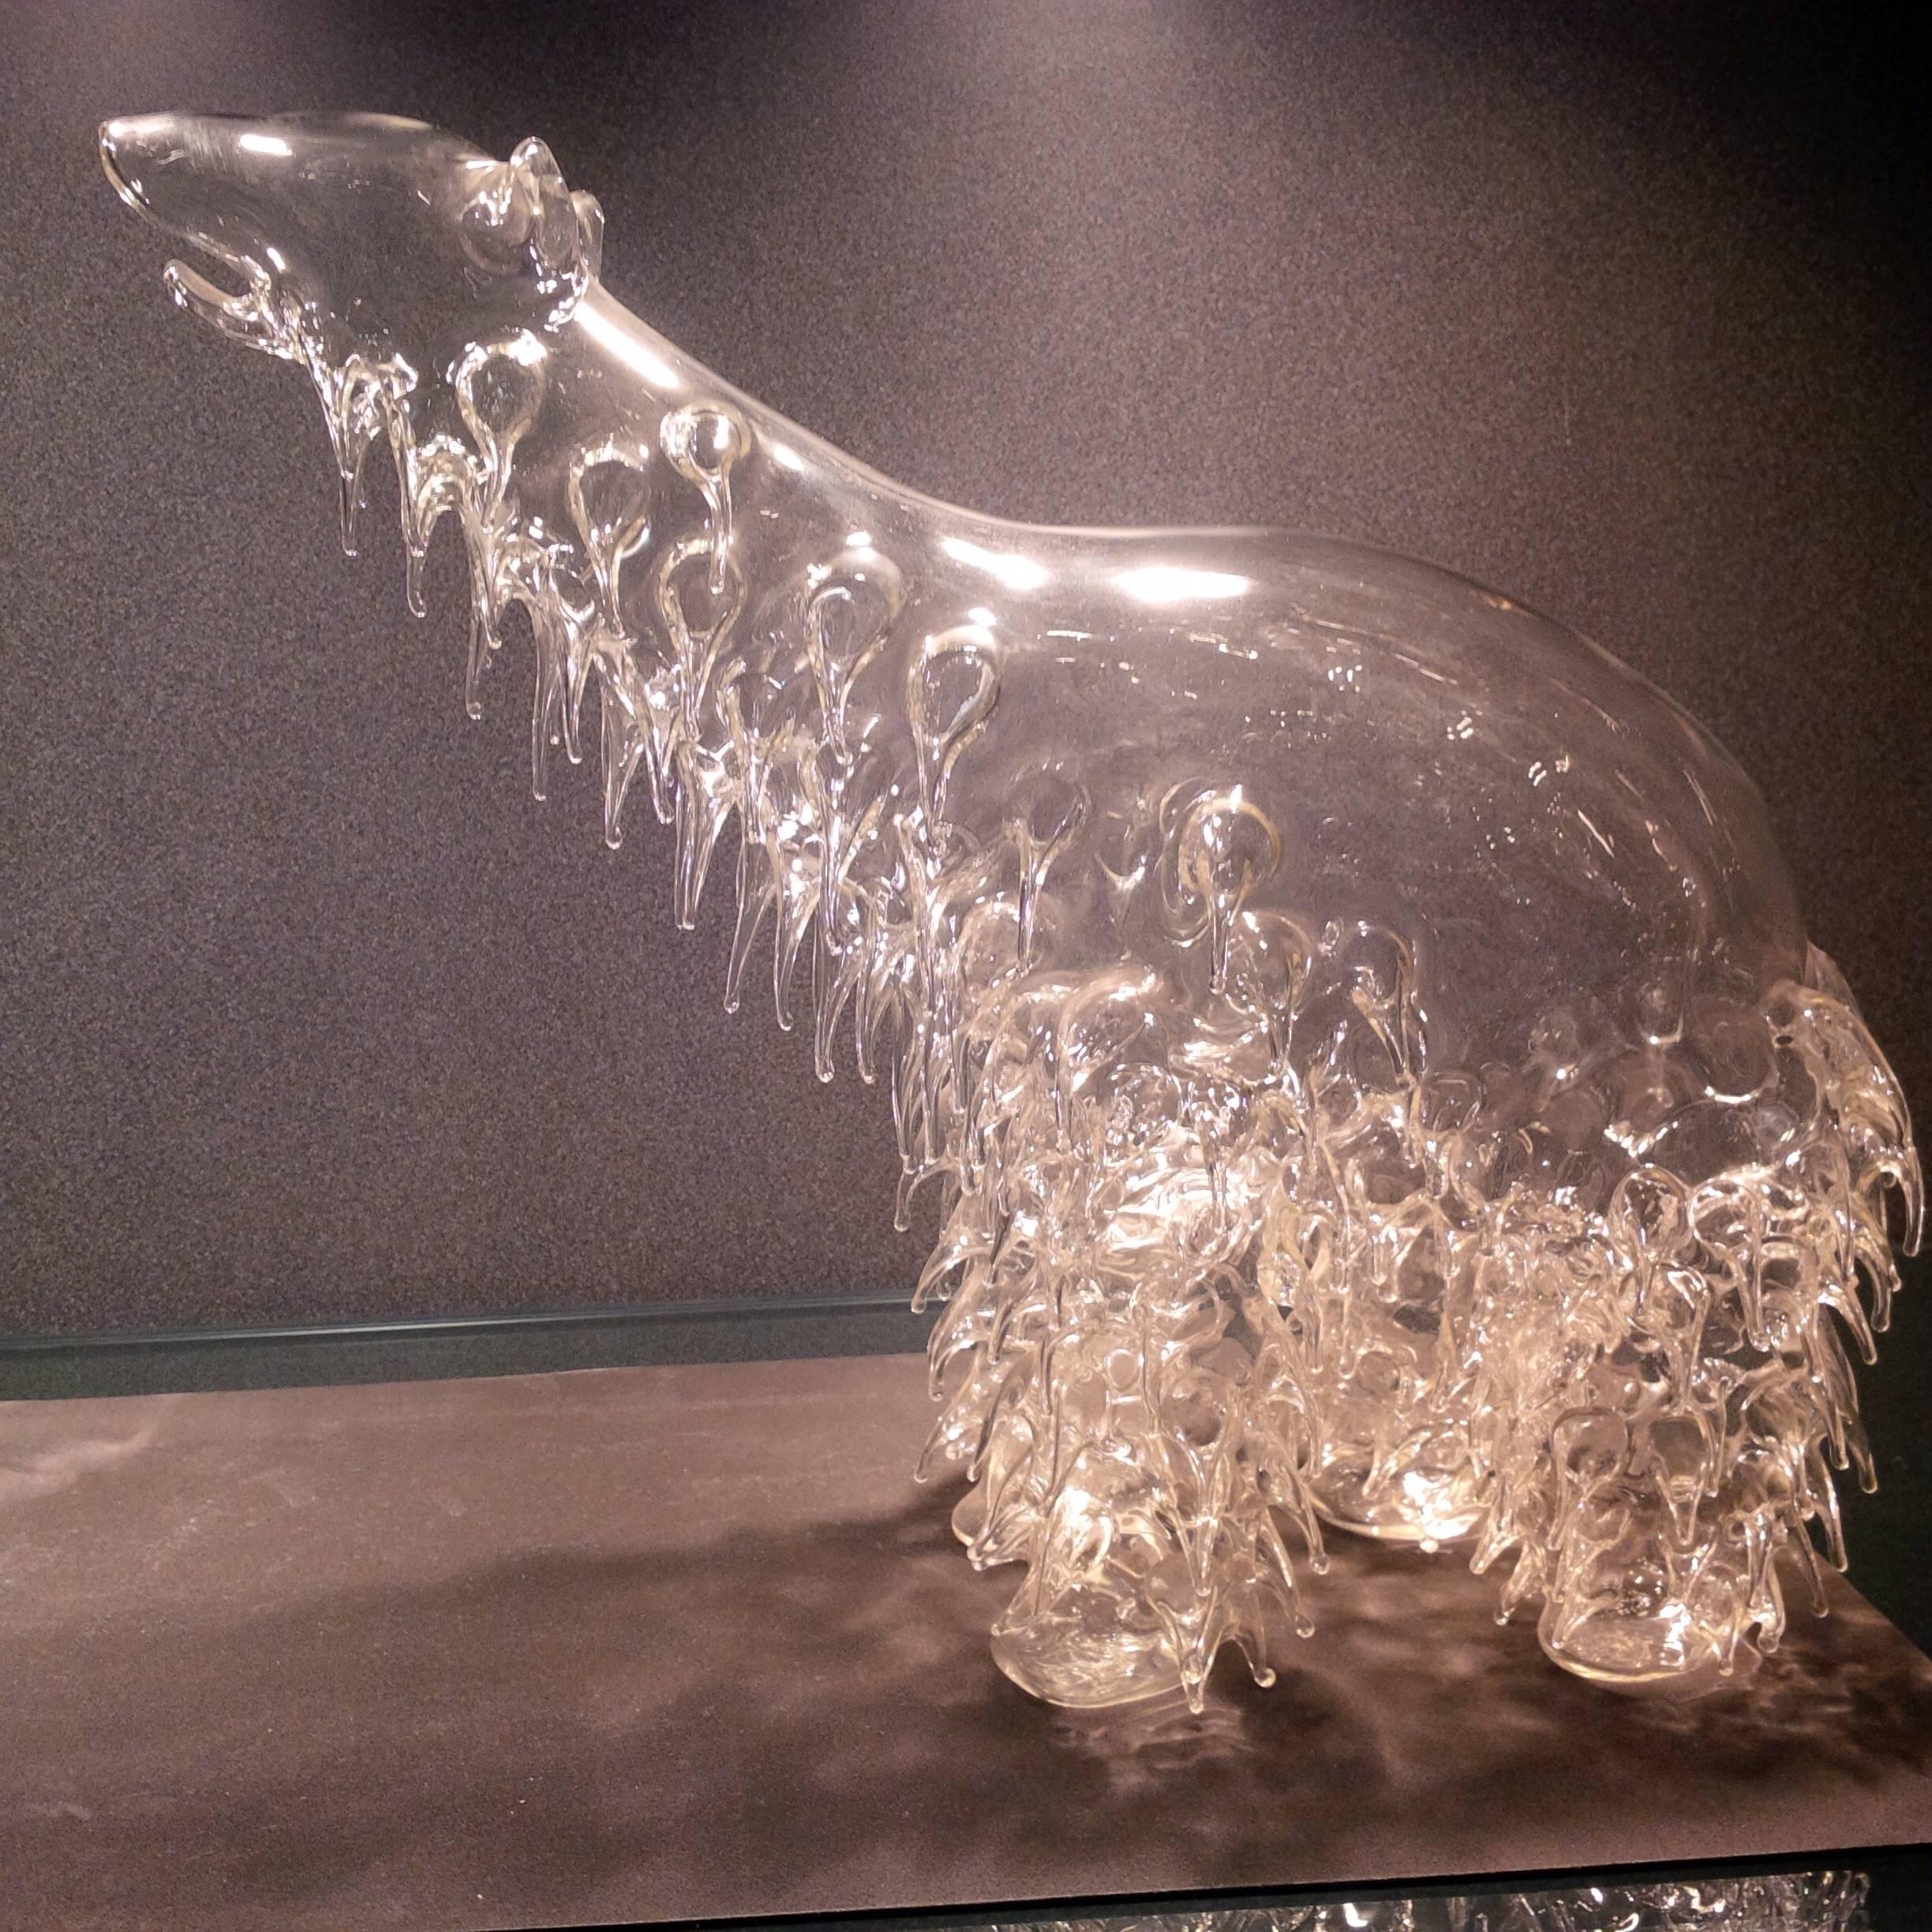 A departure from most art glass heavier sculptures, the pieces by Vera Liskova (1924-1985) are light as air both in form and appearance. Unlike most of her colleagues the artist worked the hot glass herself using hot tube sand rods in her own